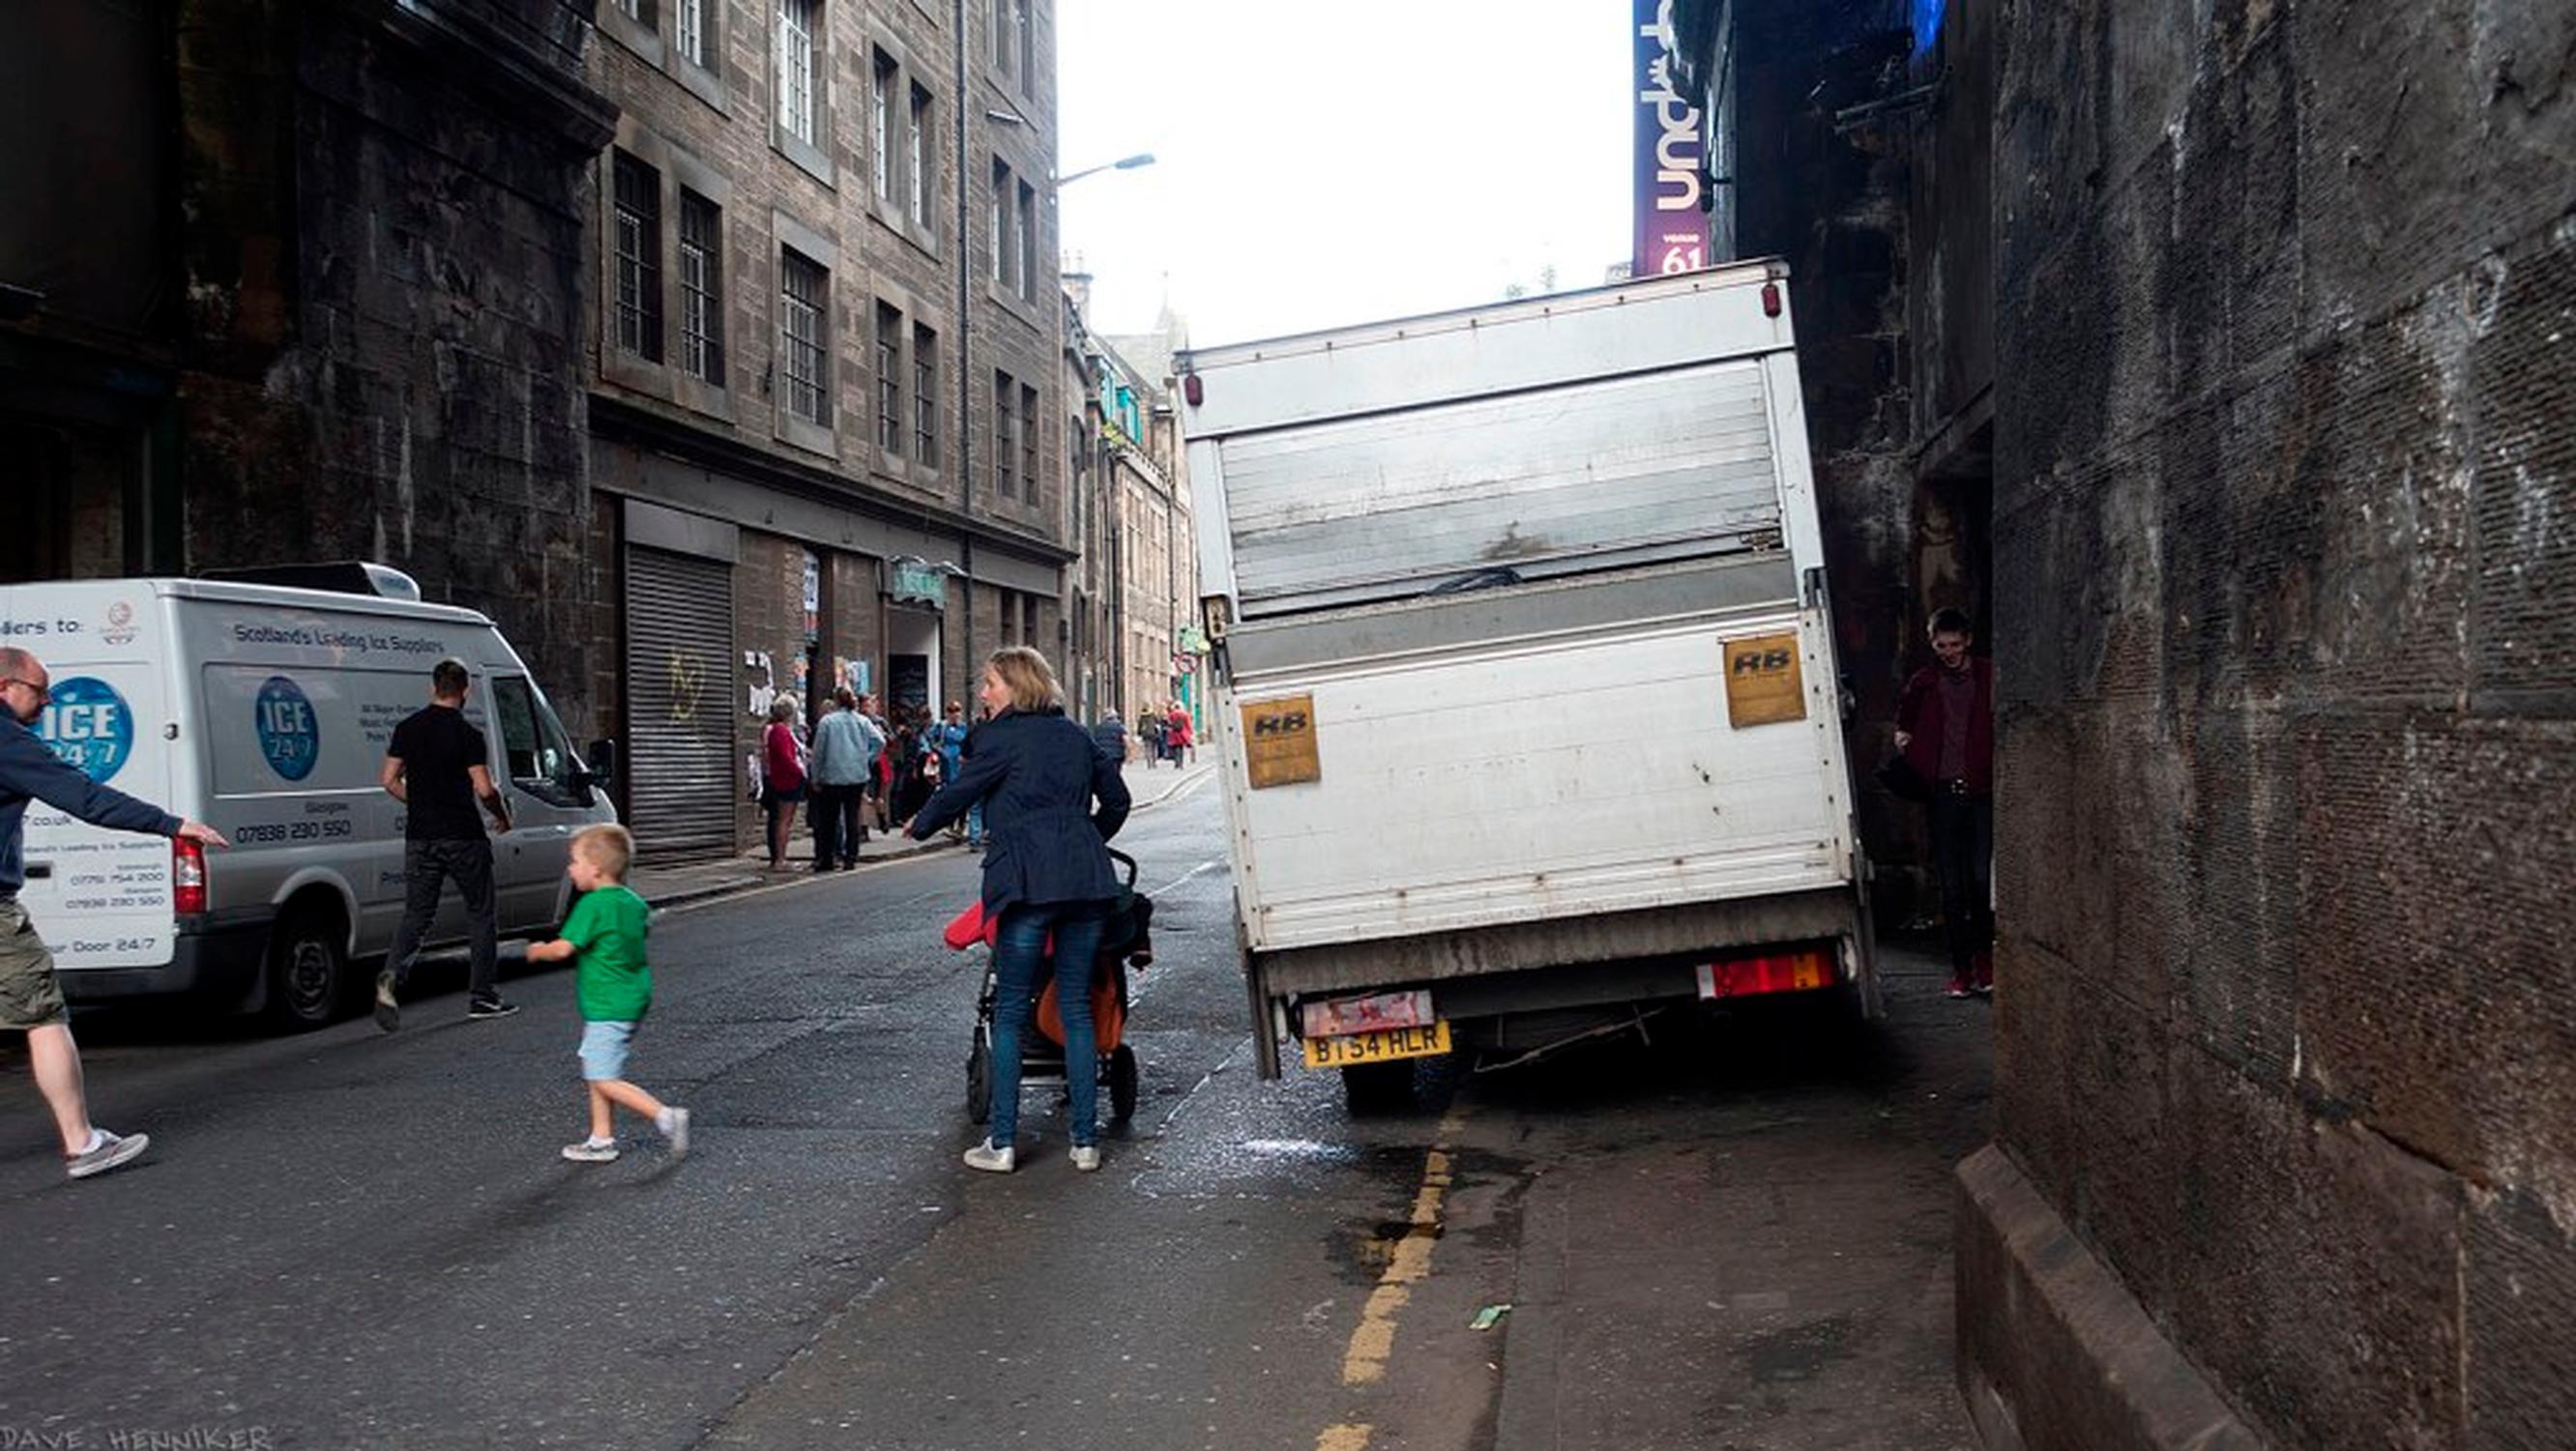 Cars and vans can cause particular challenges for disabled people and parents with pushchairs (Living Streets image of pavement parking in Cowgate, Edinburgh)